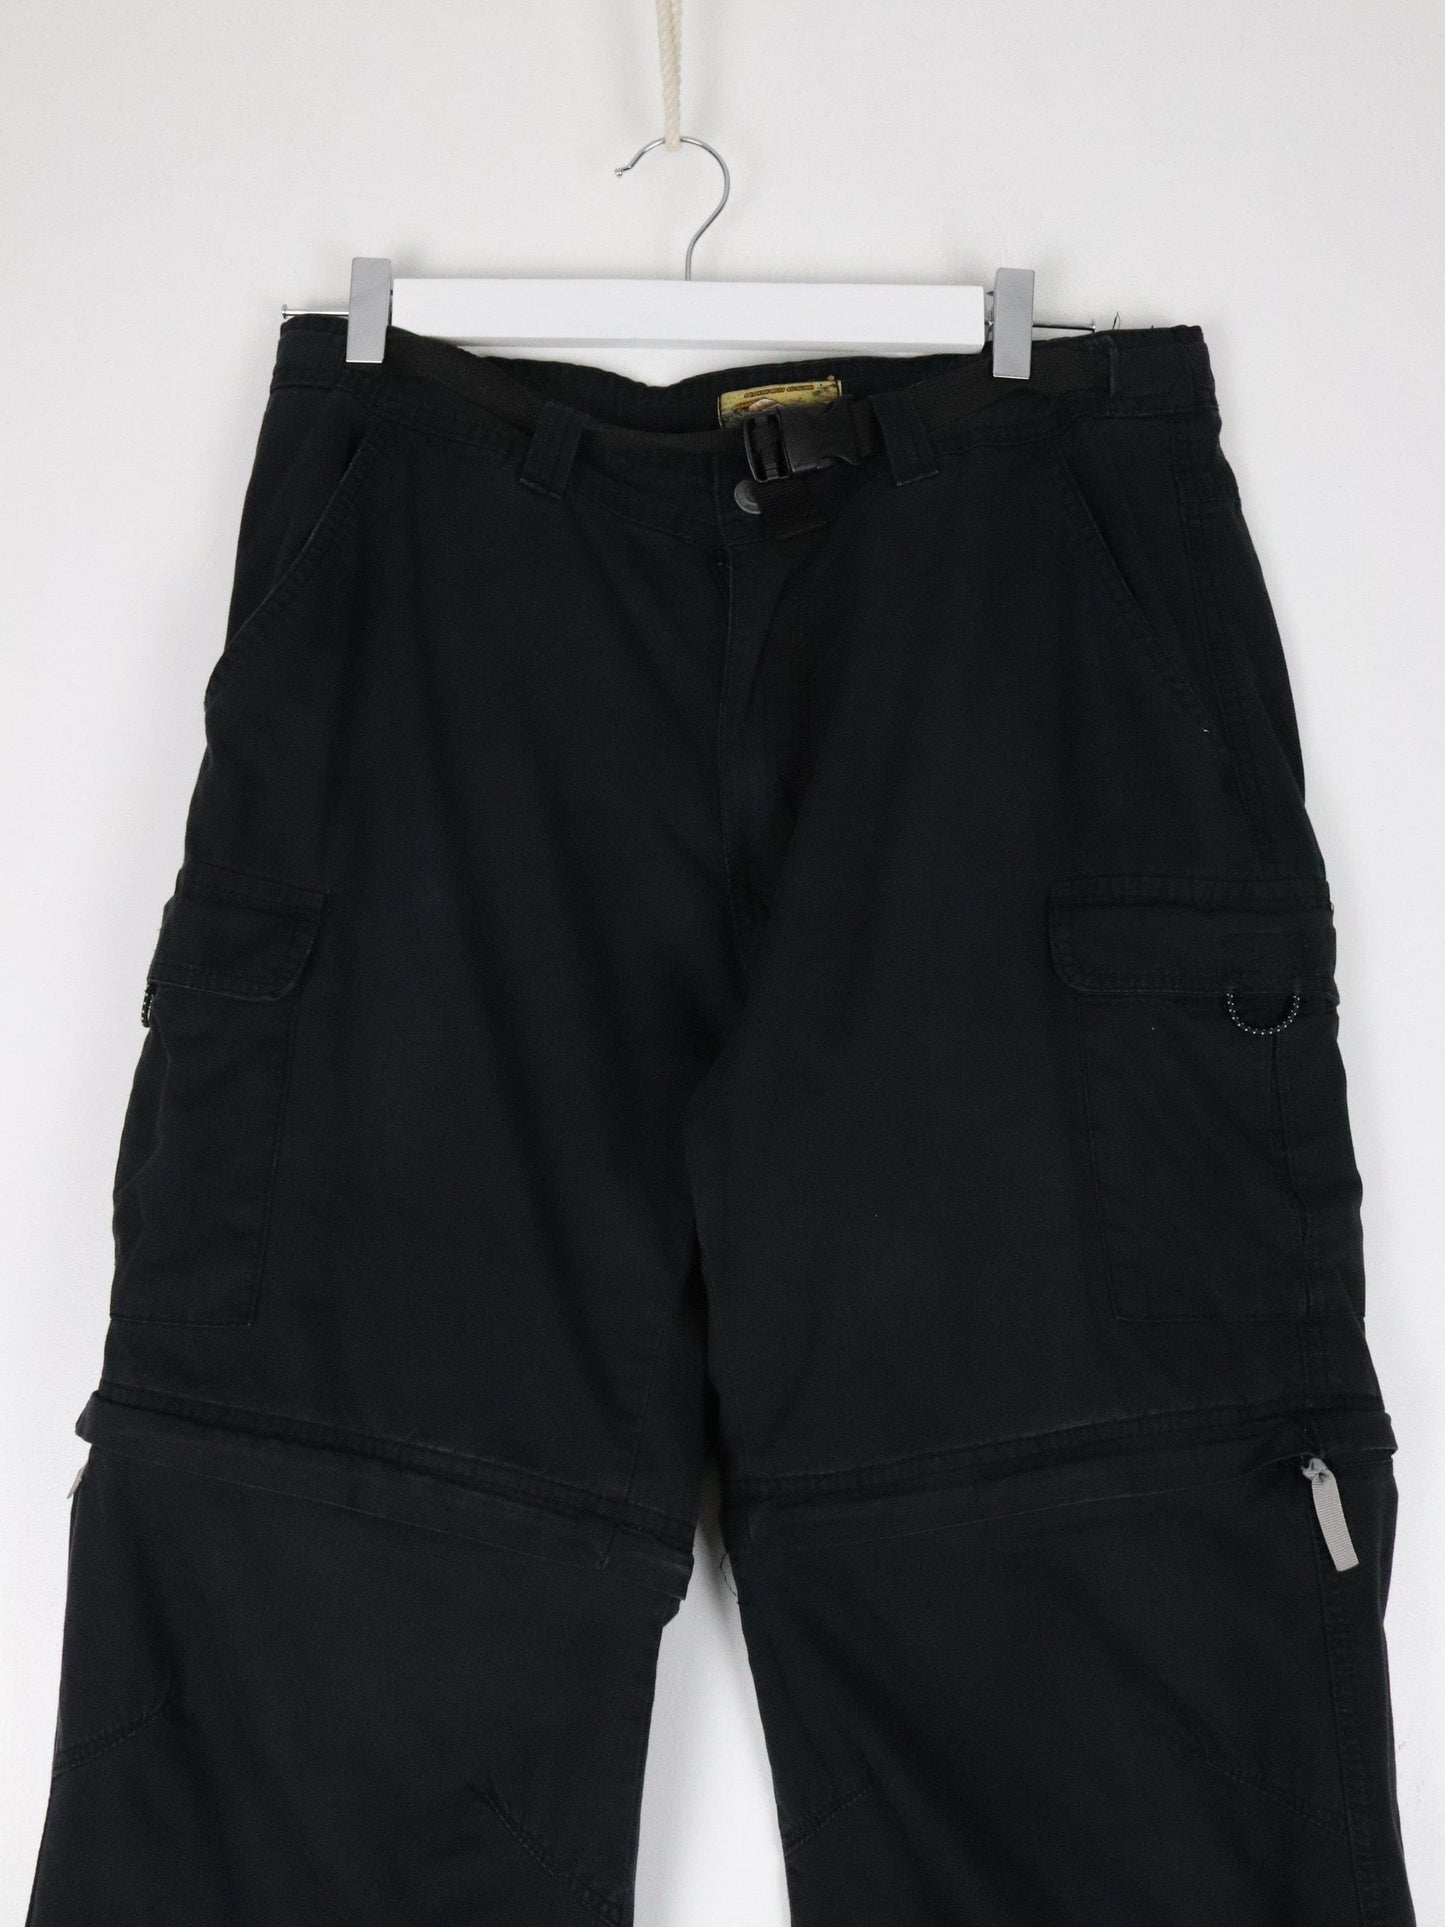 Other Pants Ranch Gear Pants Fits Mens 33 x 31 Black Cargo Convertible Hiking